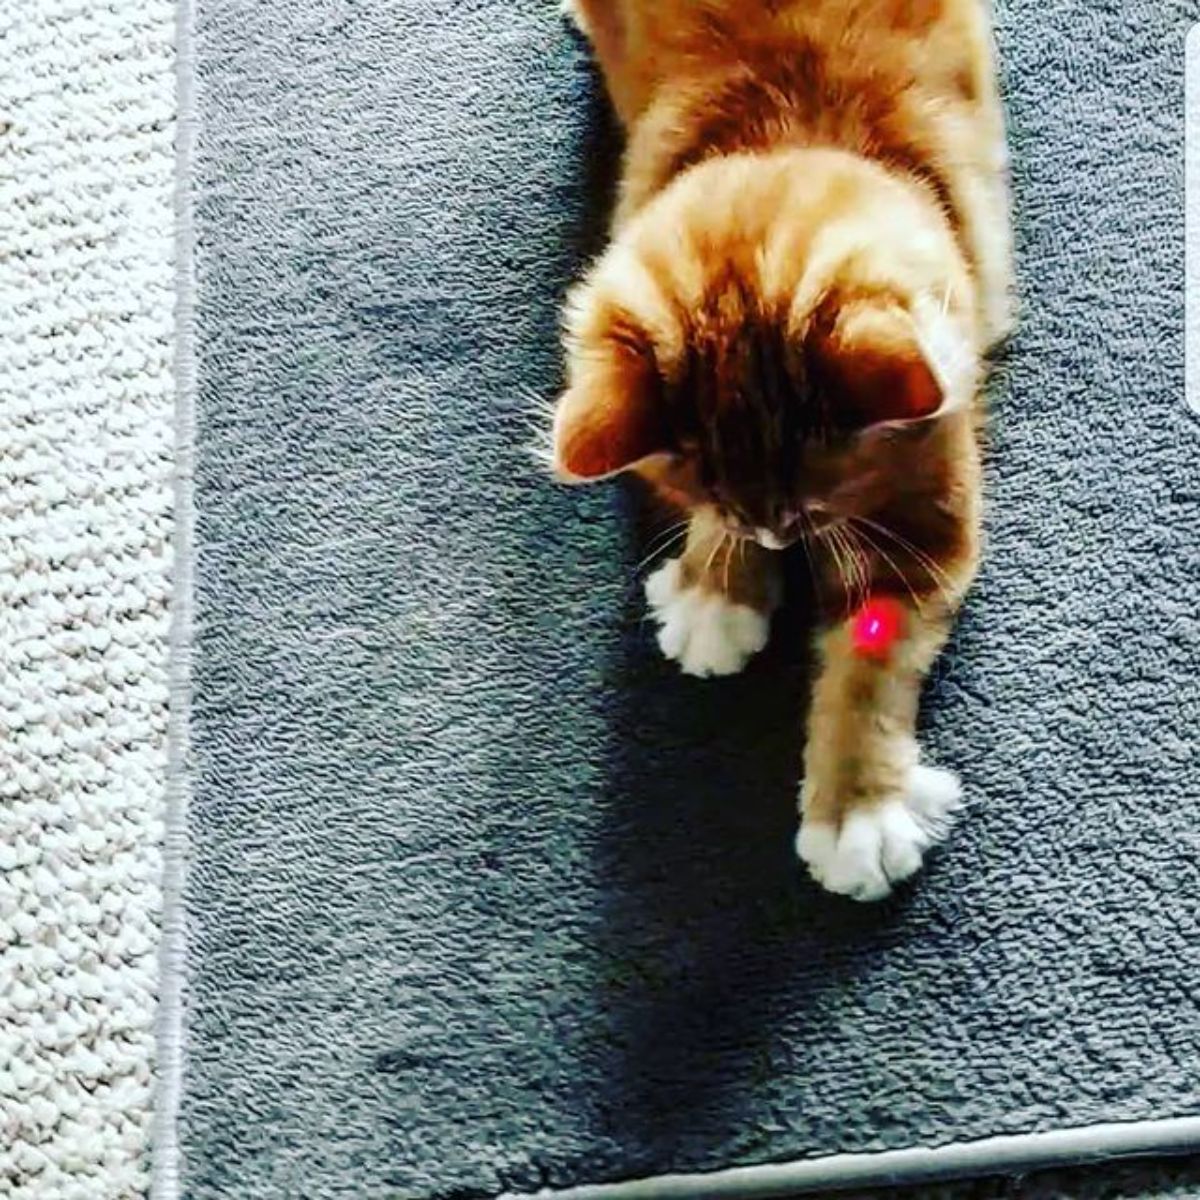 A ginger maine coon kitten on a carpet looking for a laser dot.